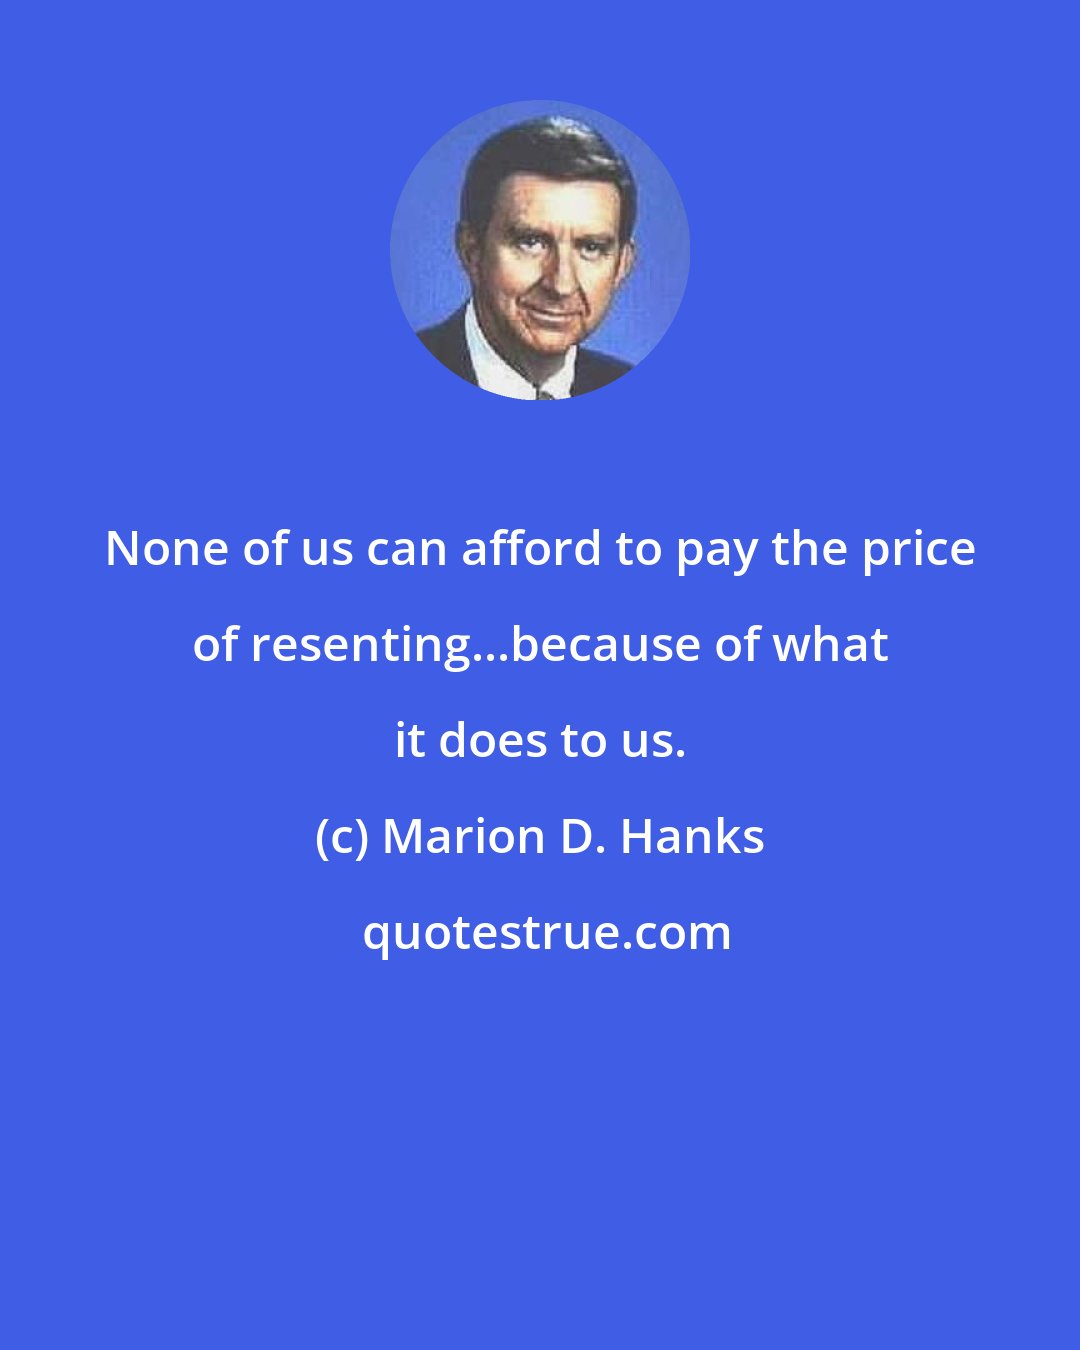 Marion D. Hanks: None of us can afford to pay the price of resenting...because of what it does to us.